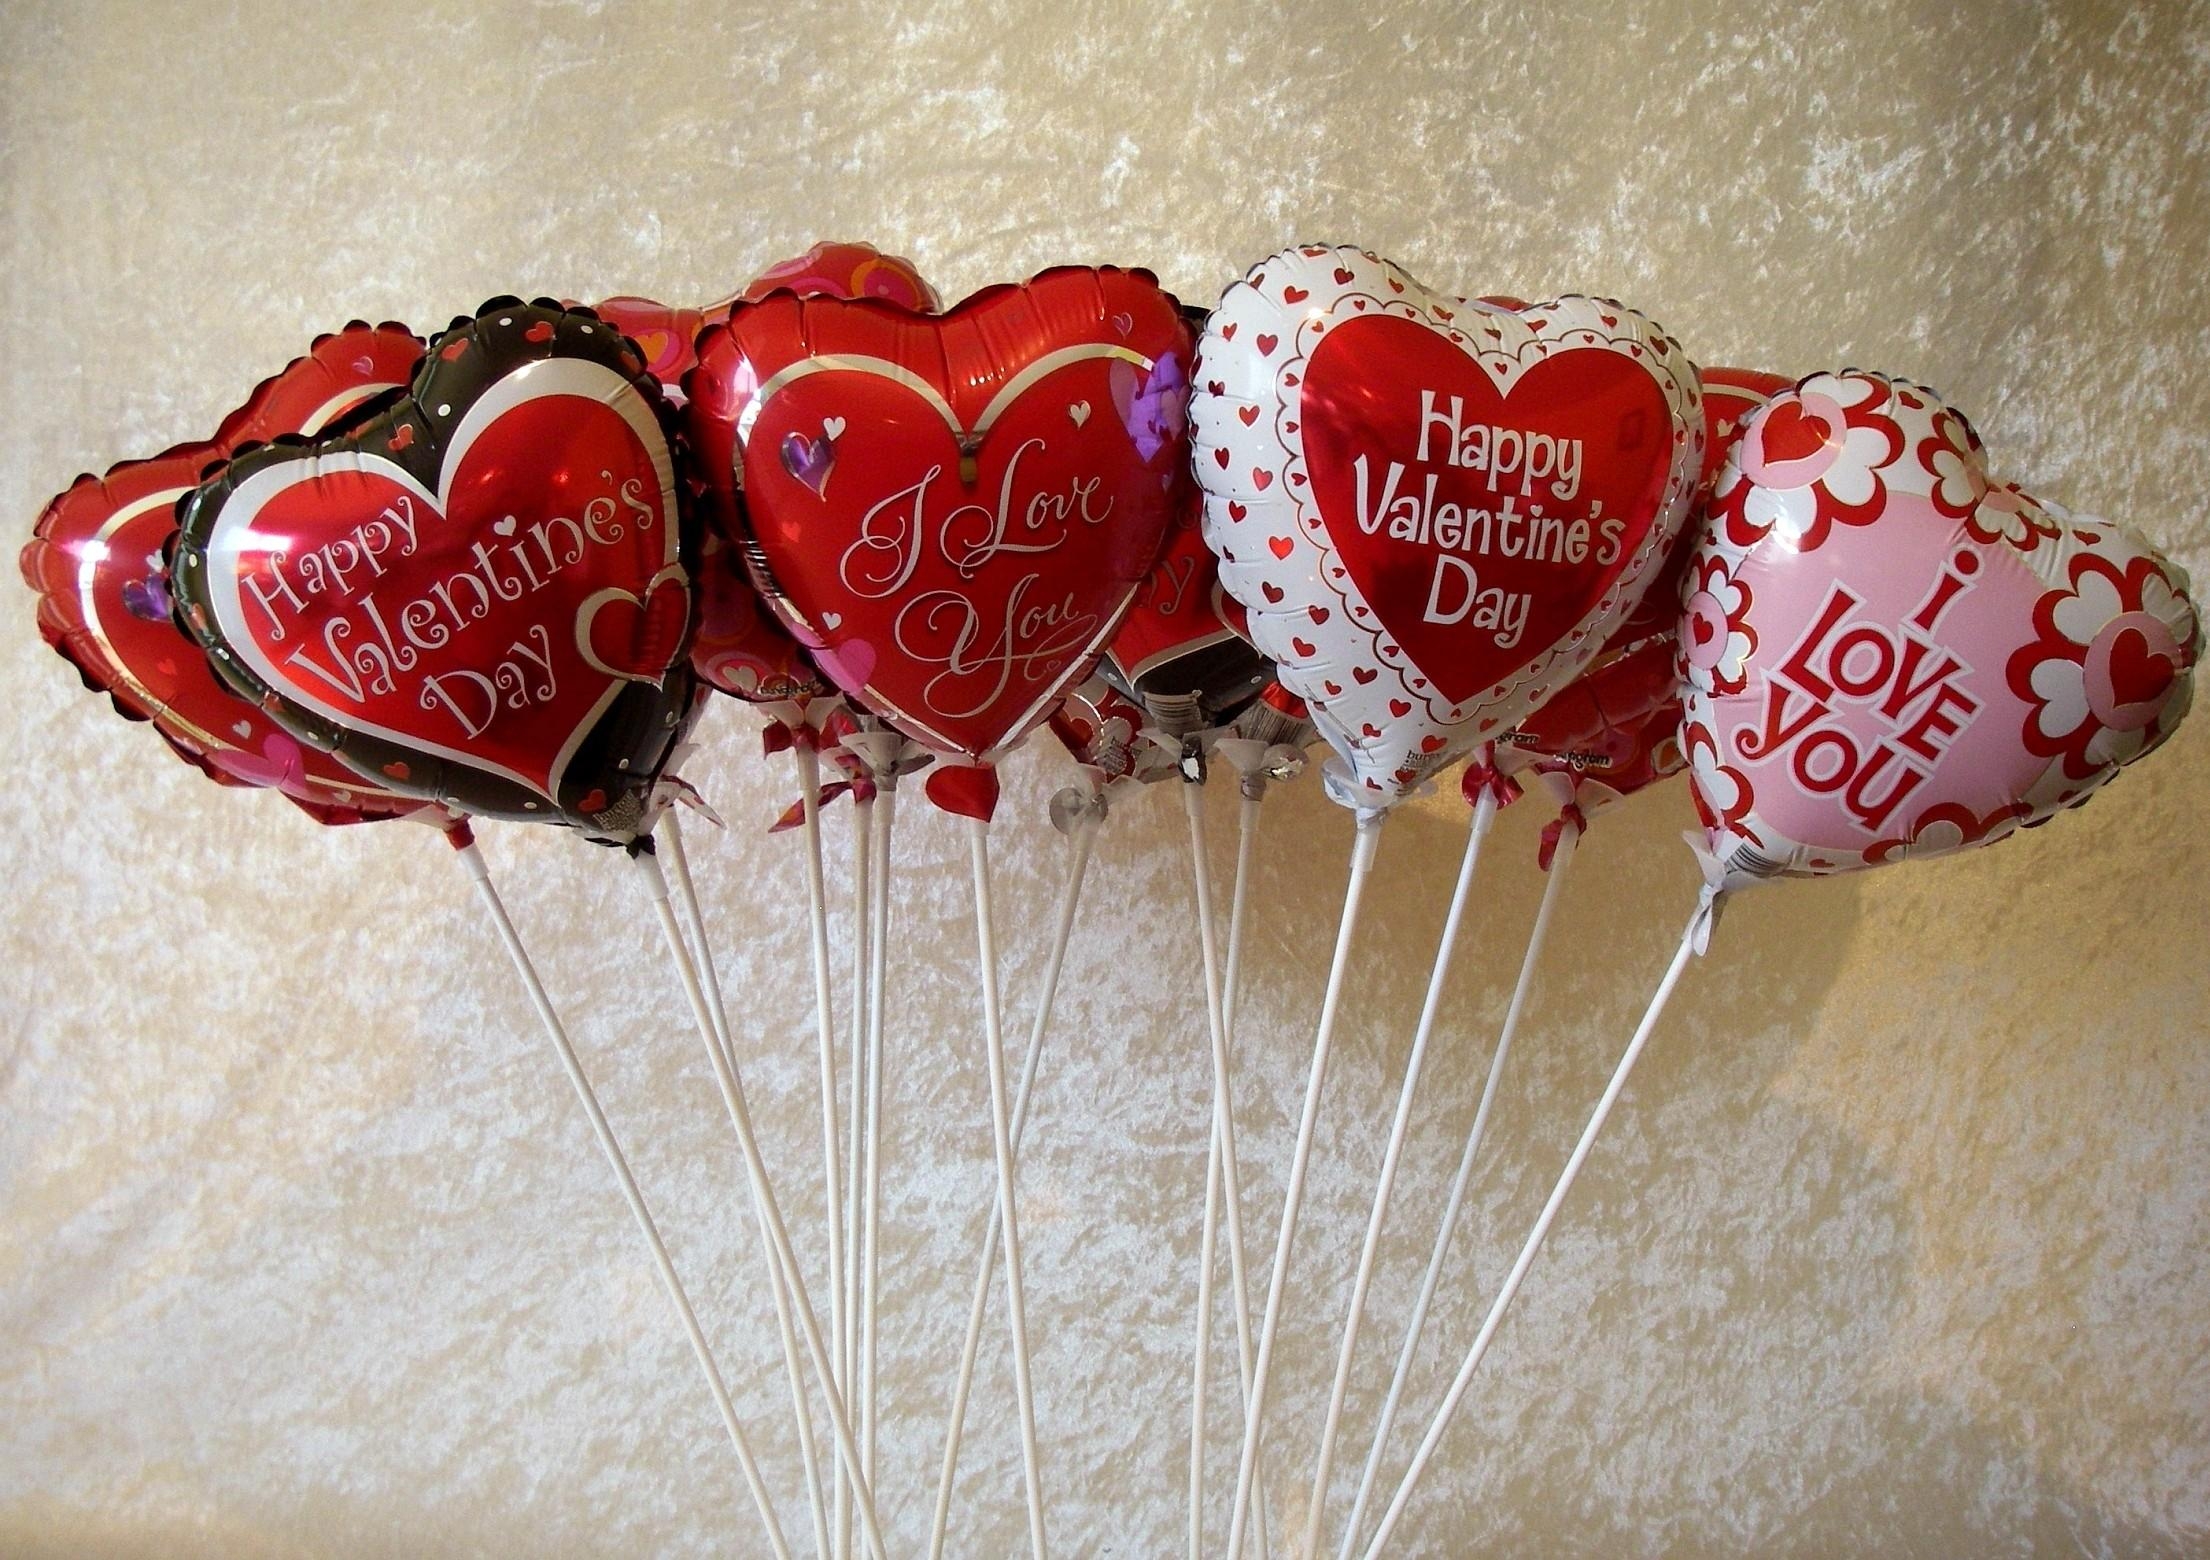 holidays, hearts, balloons, lot, lettering, inscriptions, taw, valentine's day